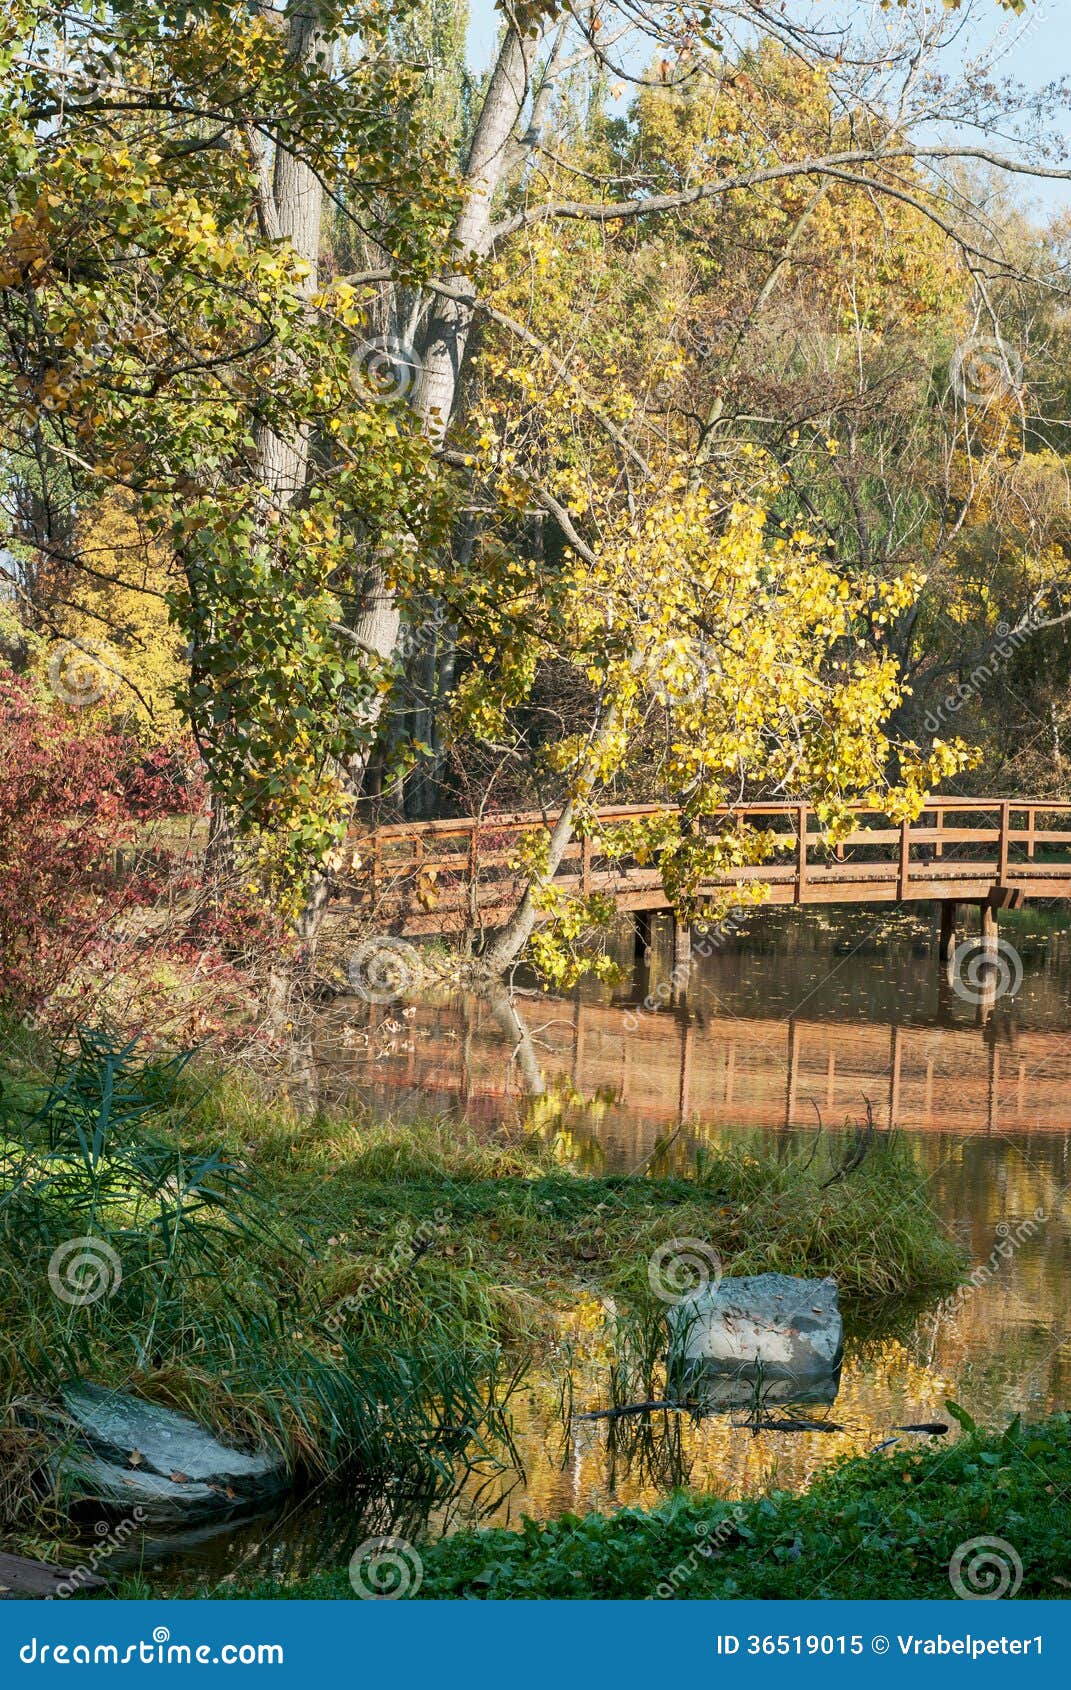 Wooden Bridge and Lake in Autumn Nature Stock Image - Image of fall ...